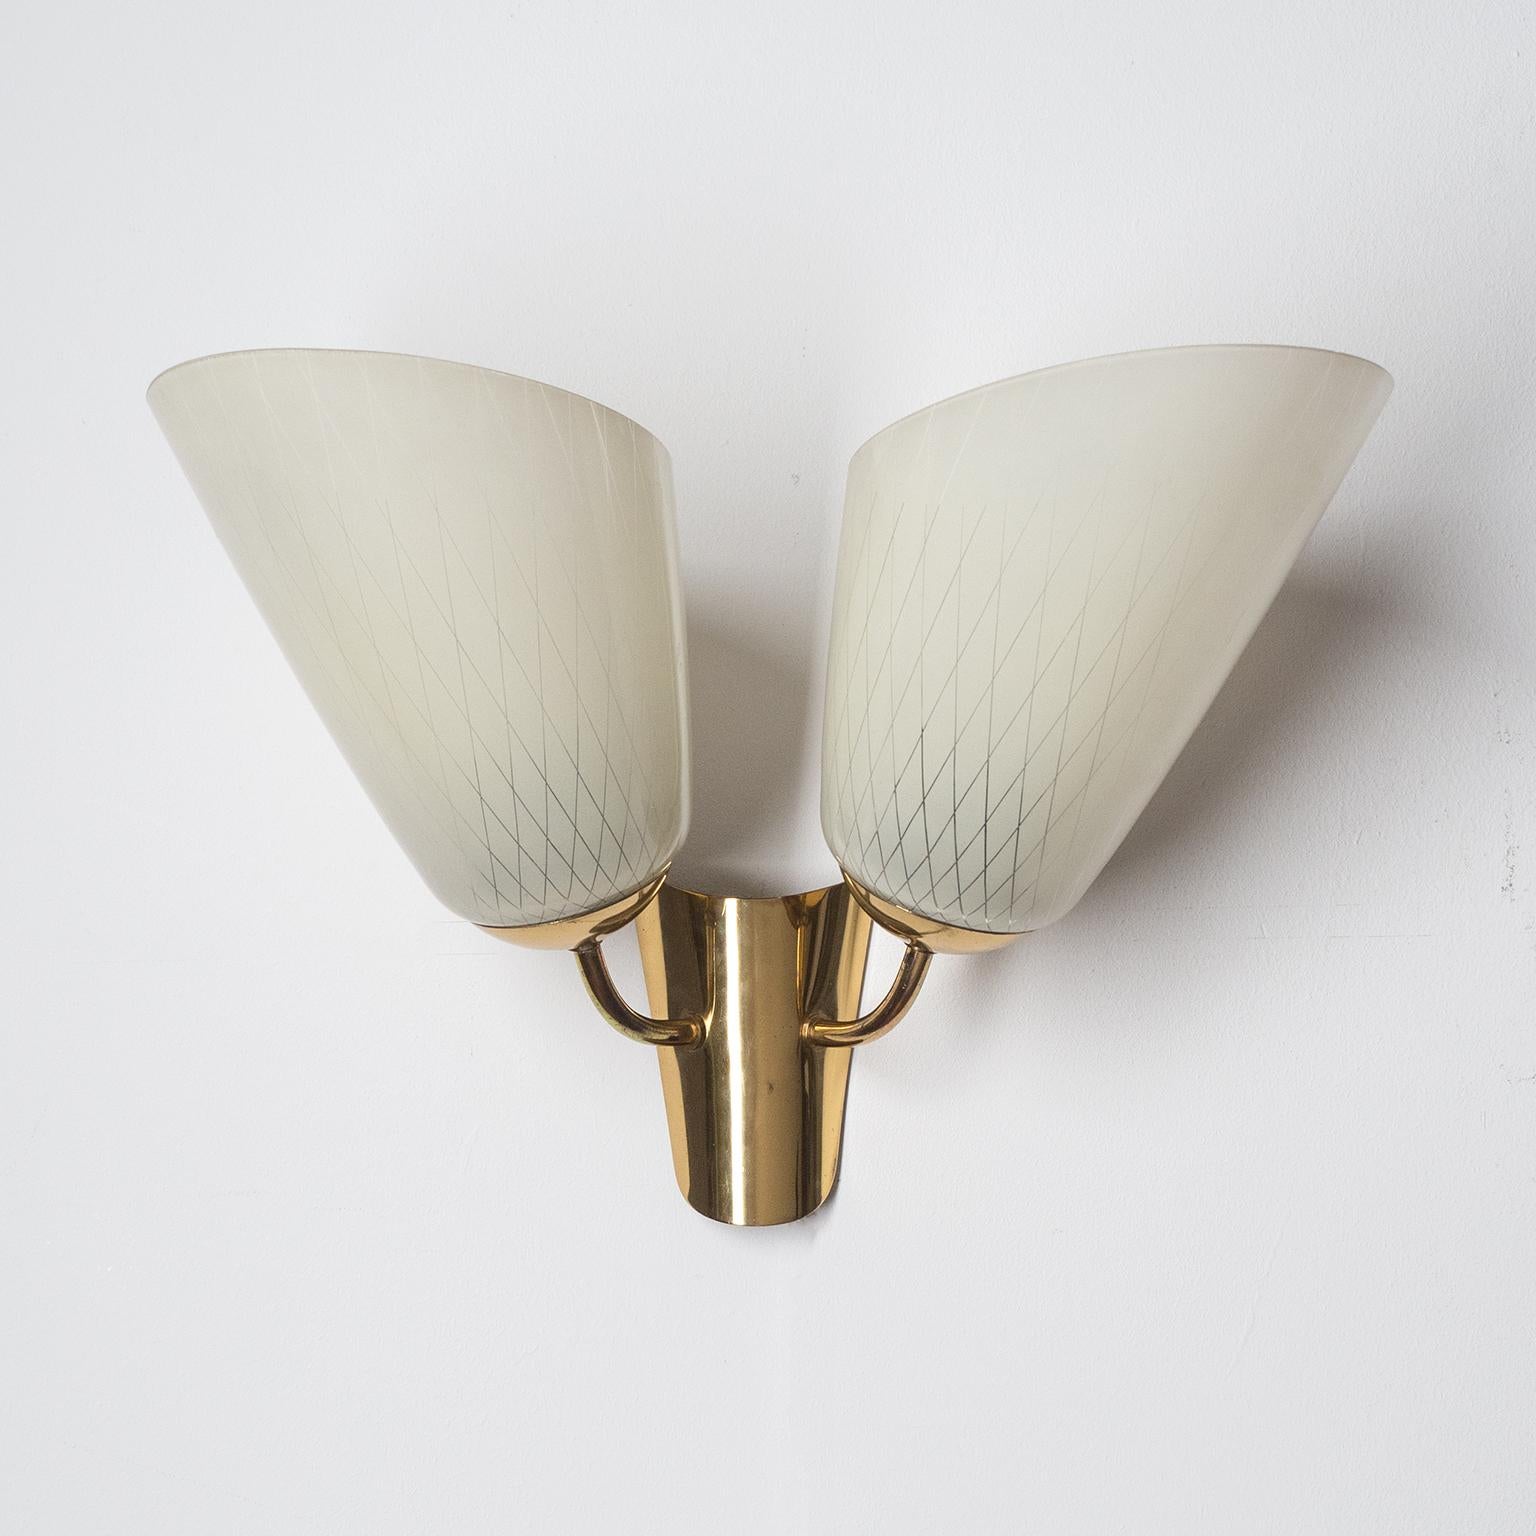 Two-Arm Wall Lamp, 1940s, Enameled Glass and Brass 3